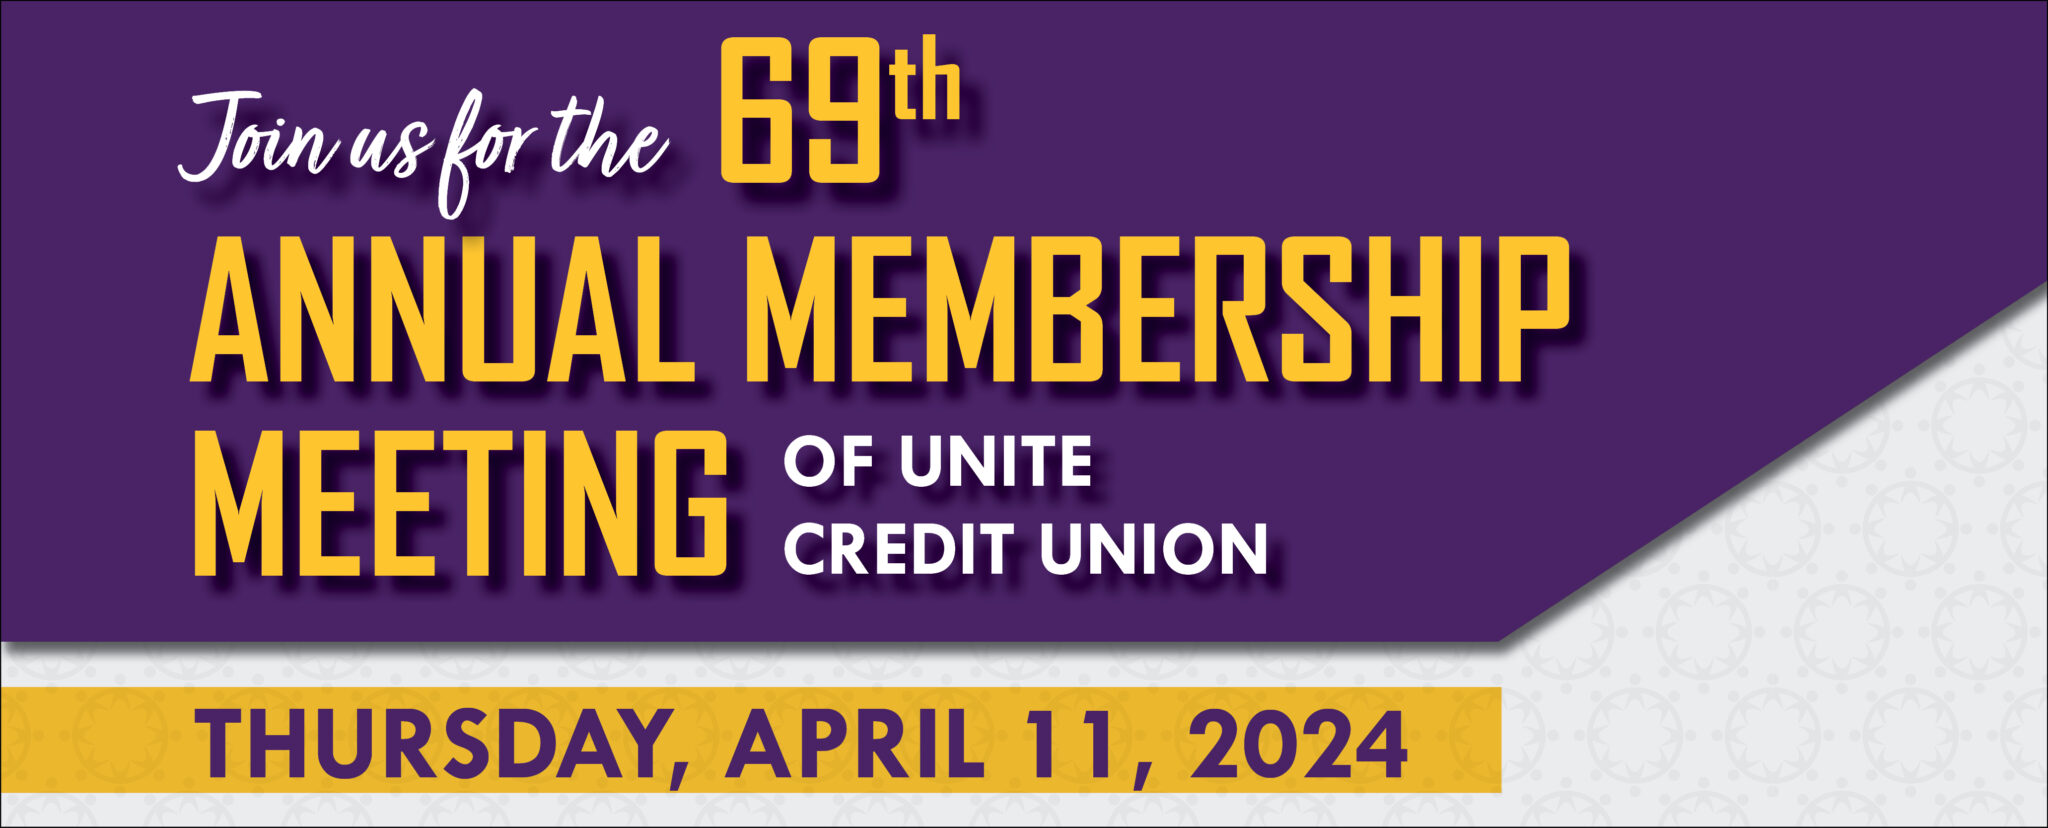 Join us for the 69th Annual Membership Meeting of UNITE Credit Union. Thursday, April 11, 2024